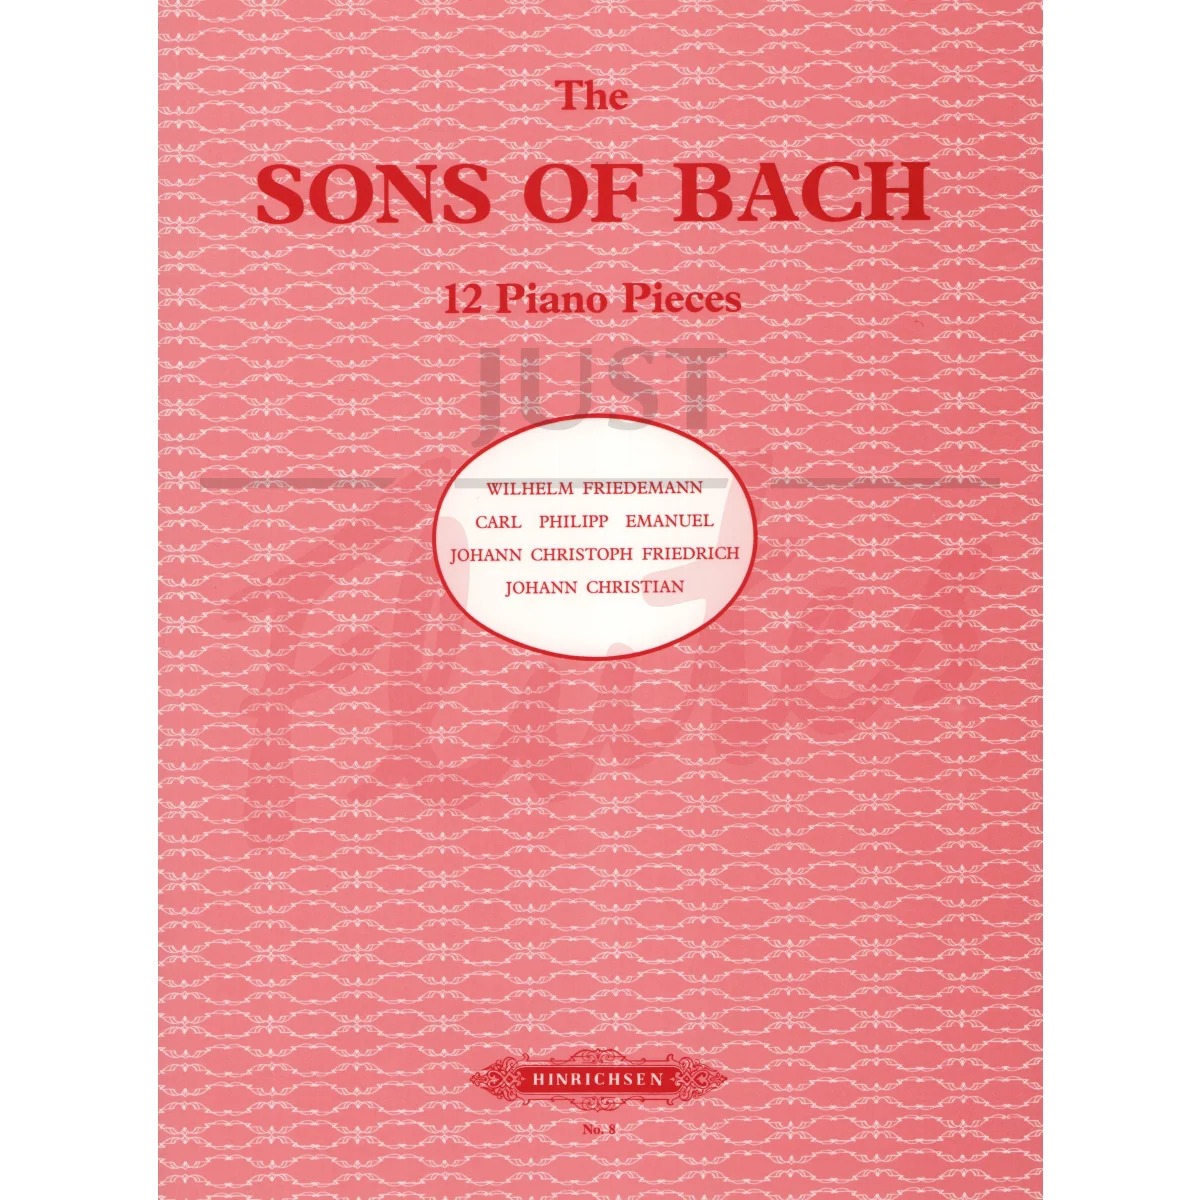 The Sons of Bach - 12 Piano Pieces